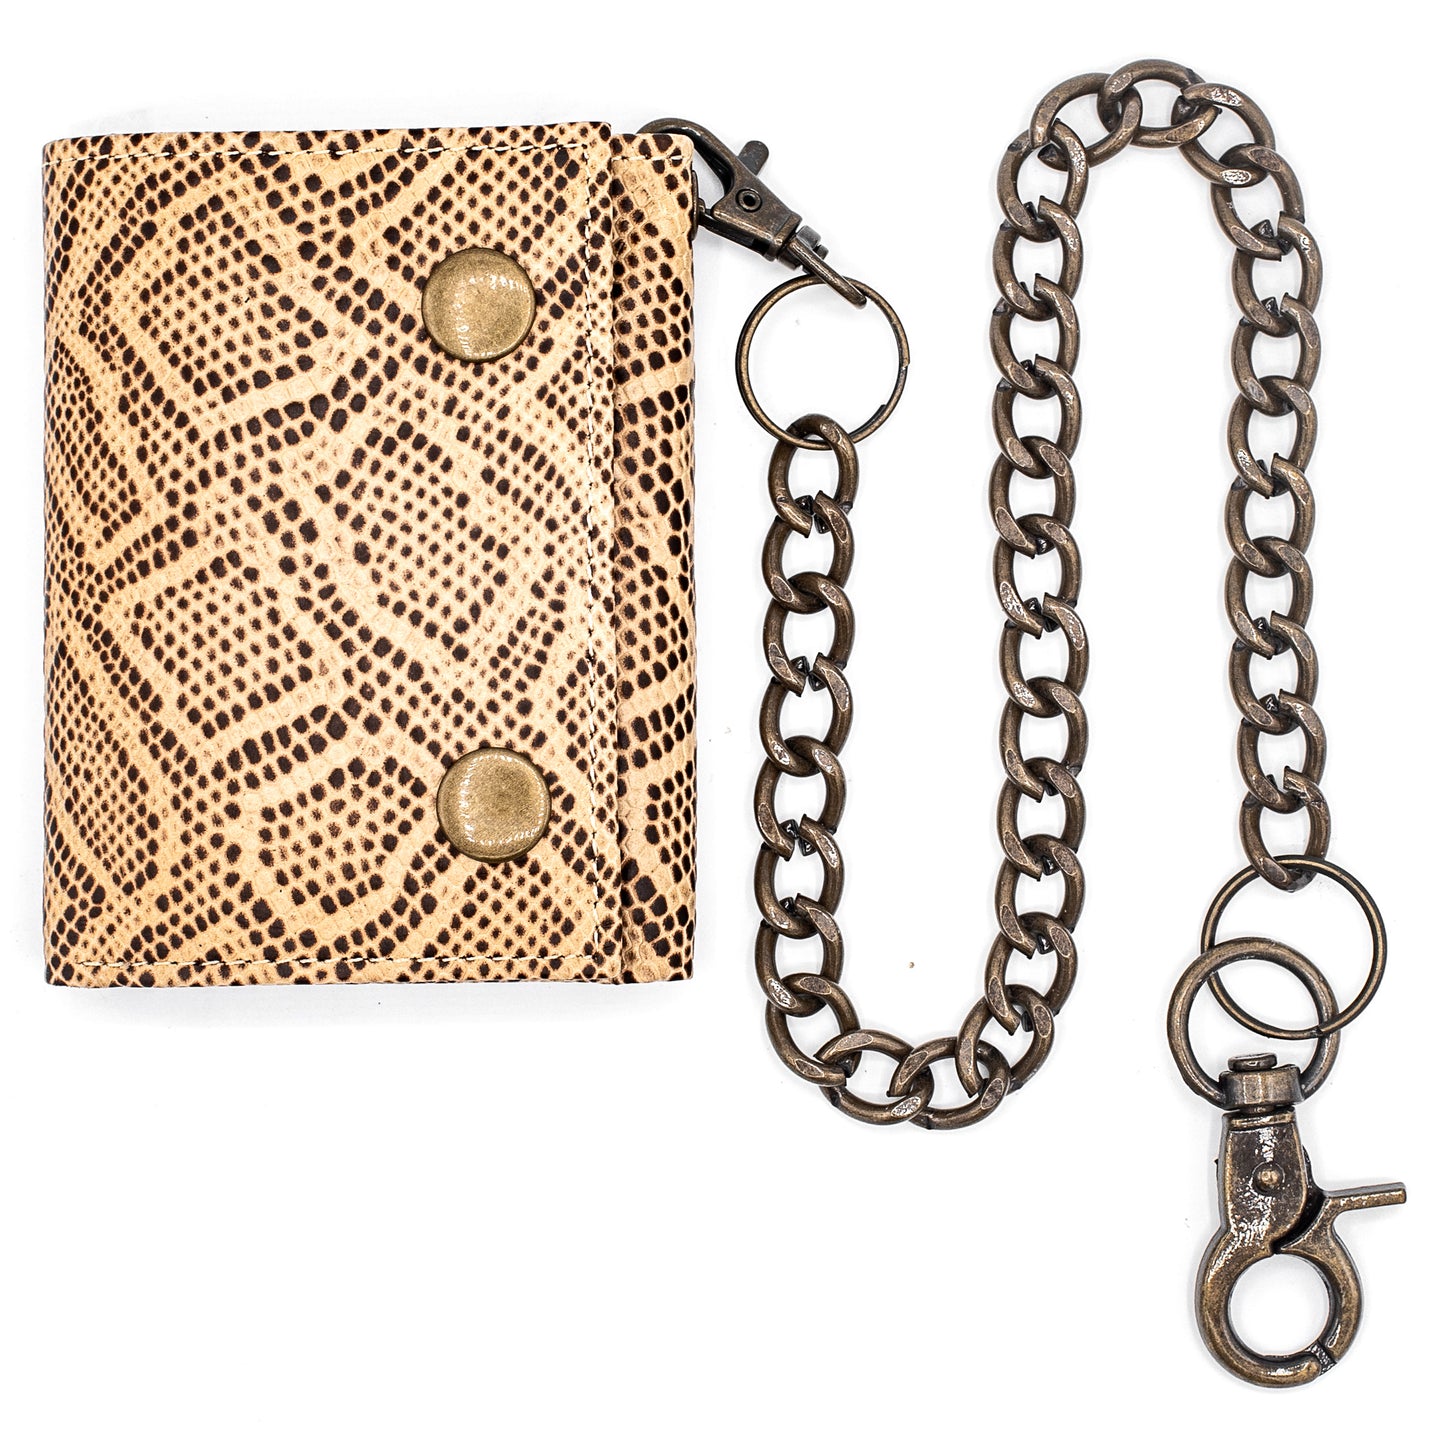 Trifold RFID Safe Tan Leather Brown Cobra Chain Wallet for Men With Key Holder And Zipper Pocket Inside